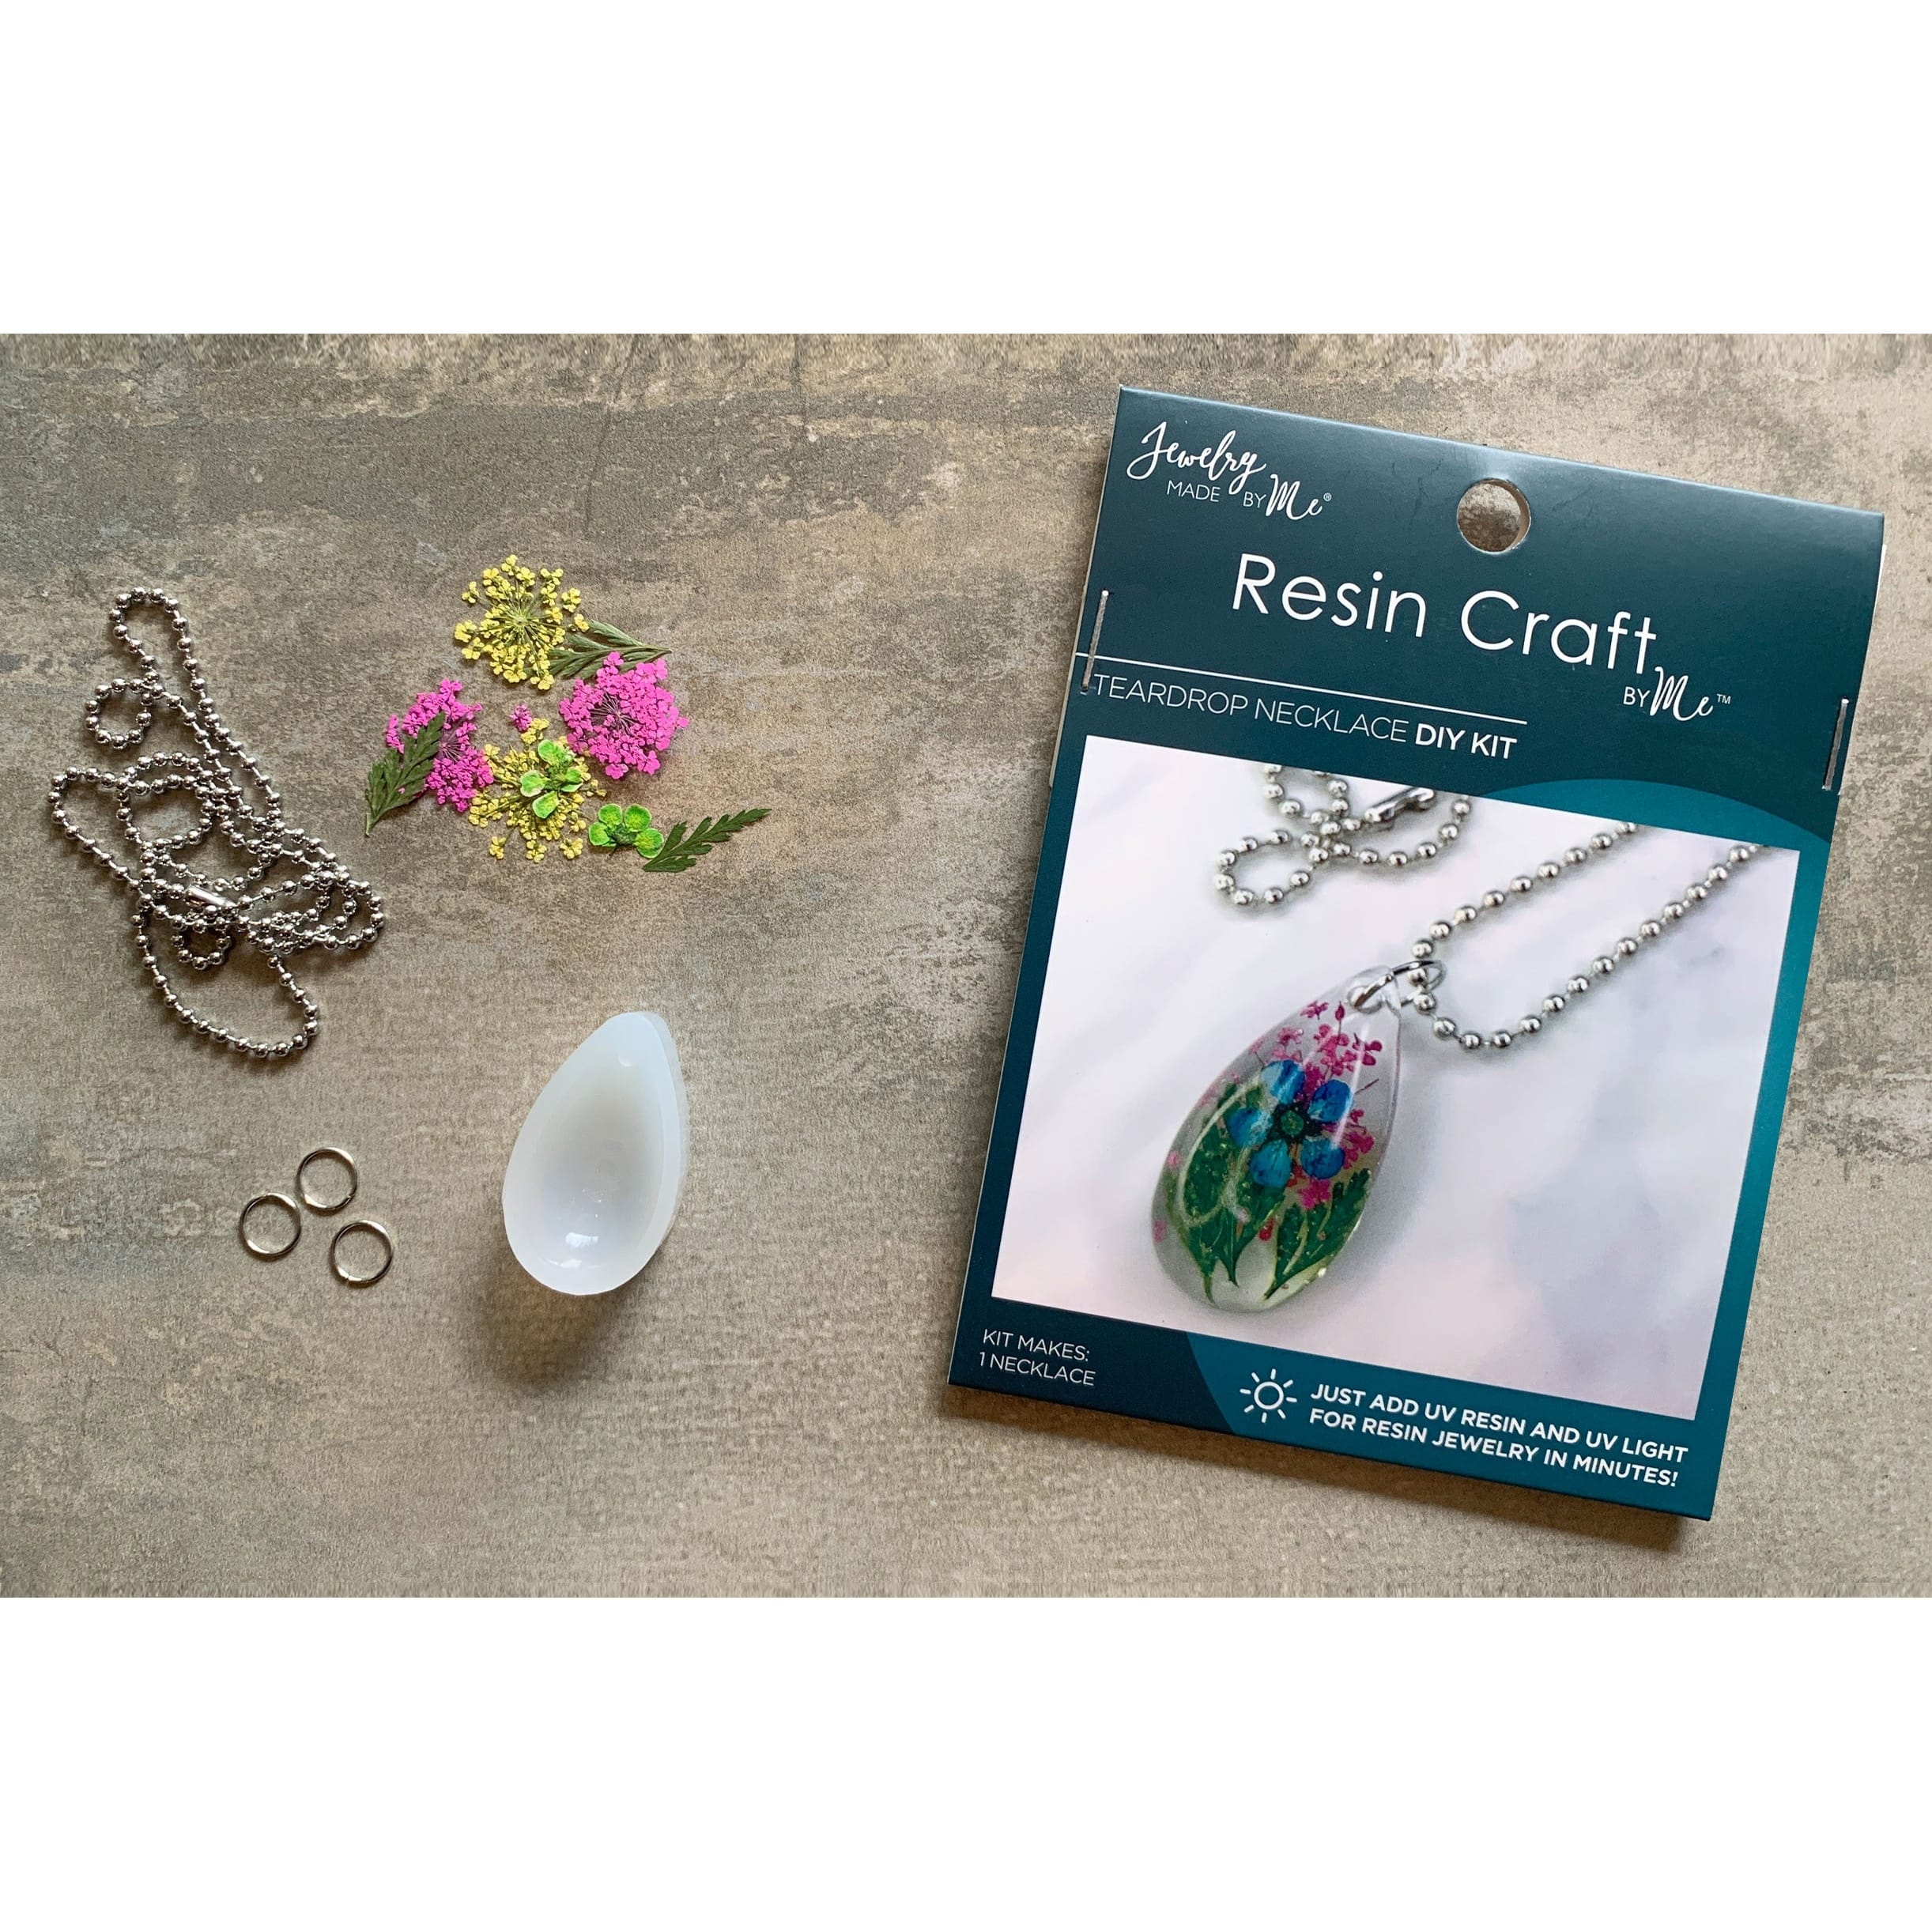 Jewelry Made By Me Resin Craft Flower Drop Pendant Mini Kit